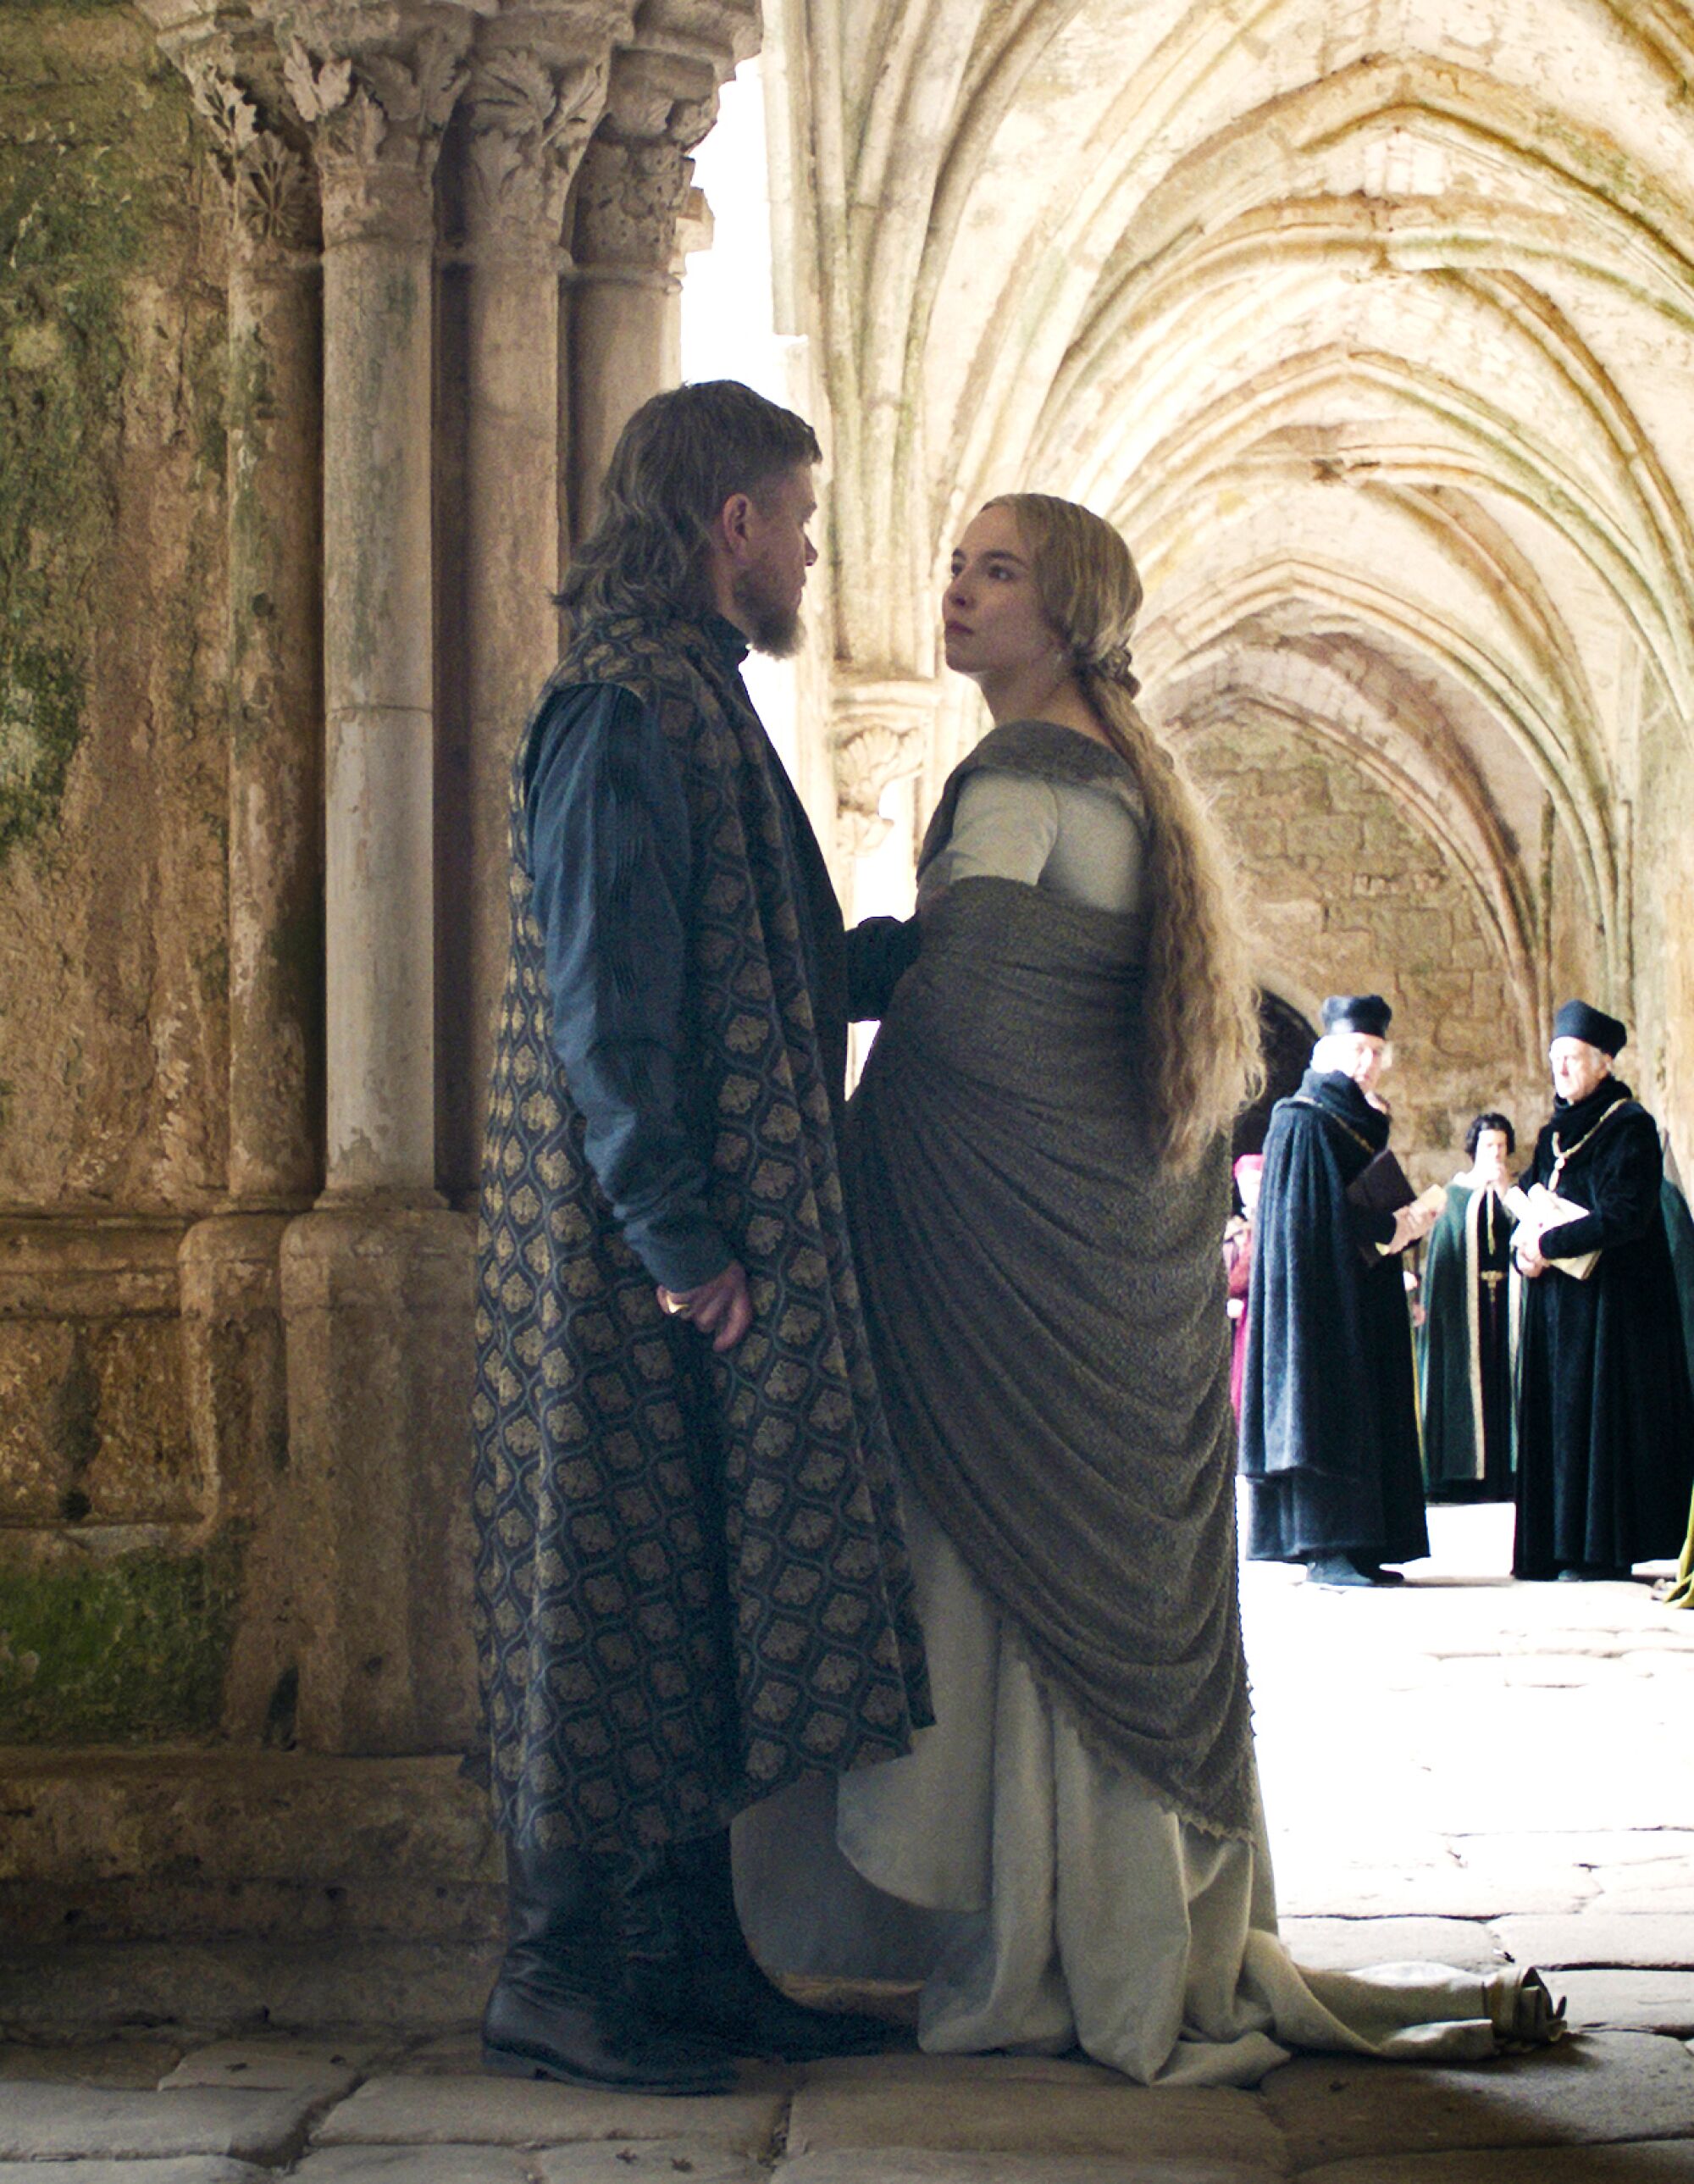 Matt Damon and Jodie Comer take a moment before having their rape case heard in a scene from "The Last Duel."